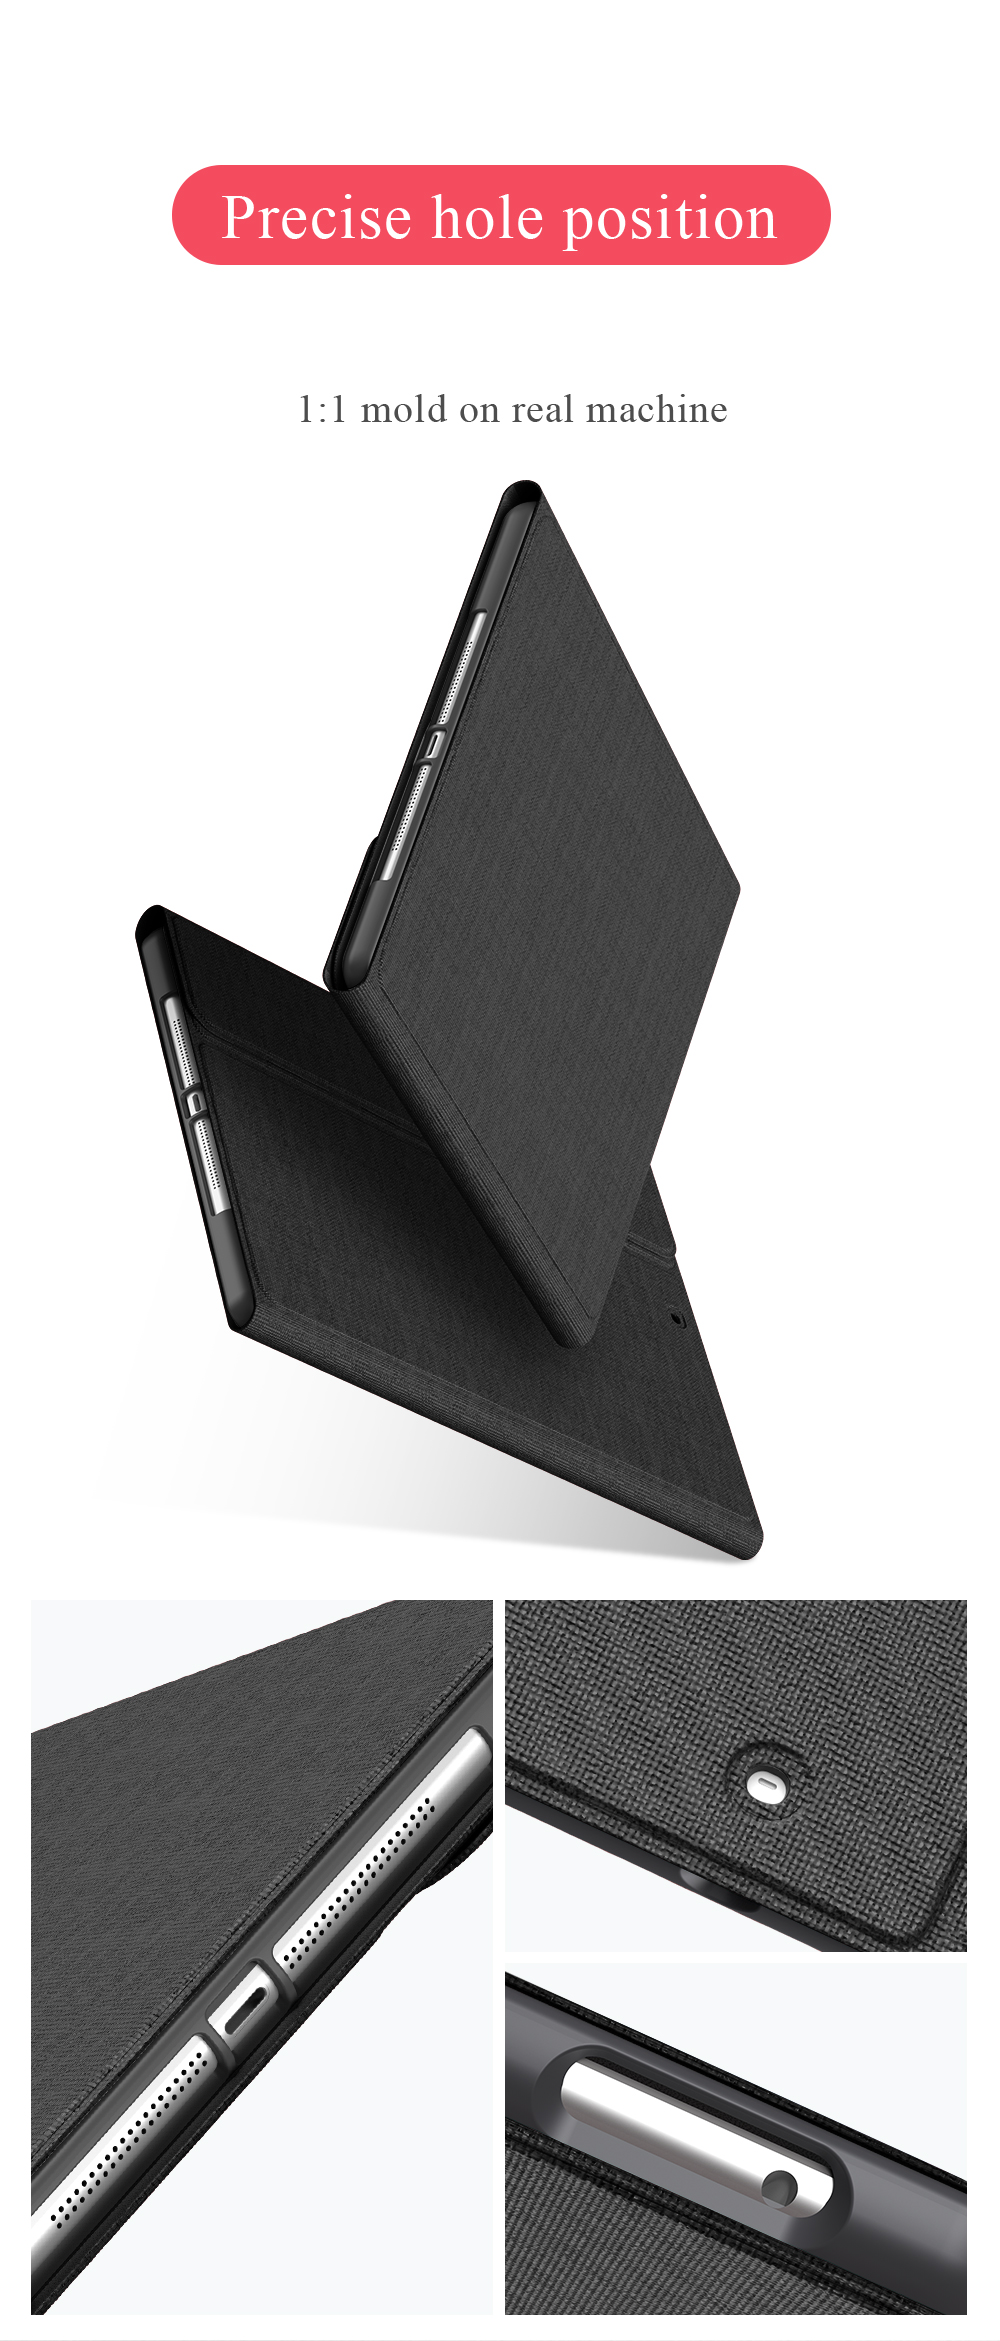 Auto Sleep Detachable bluetooth Wireless Keyboard Kickstand Tablet Case With Pencil Holder For iPad Pro 10.5 Inch 2017/iPad Air 10.5 Inch 2019 19